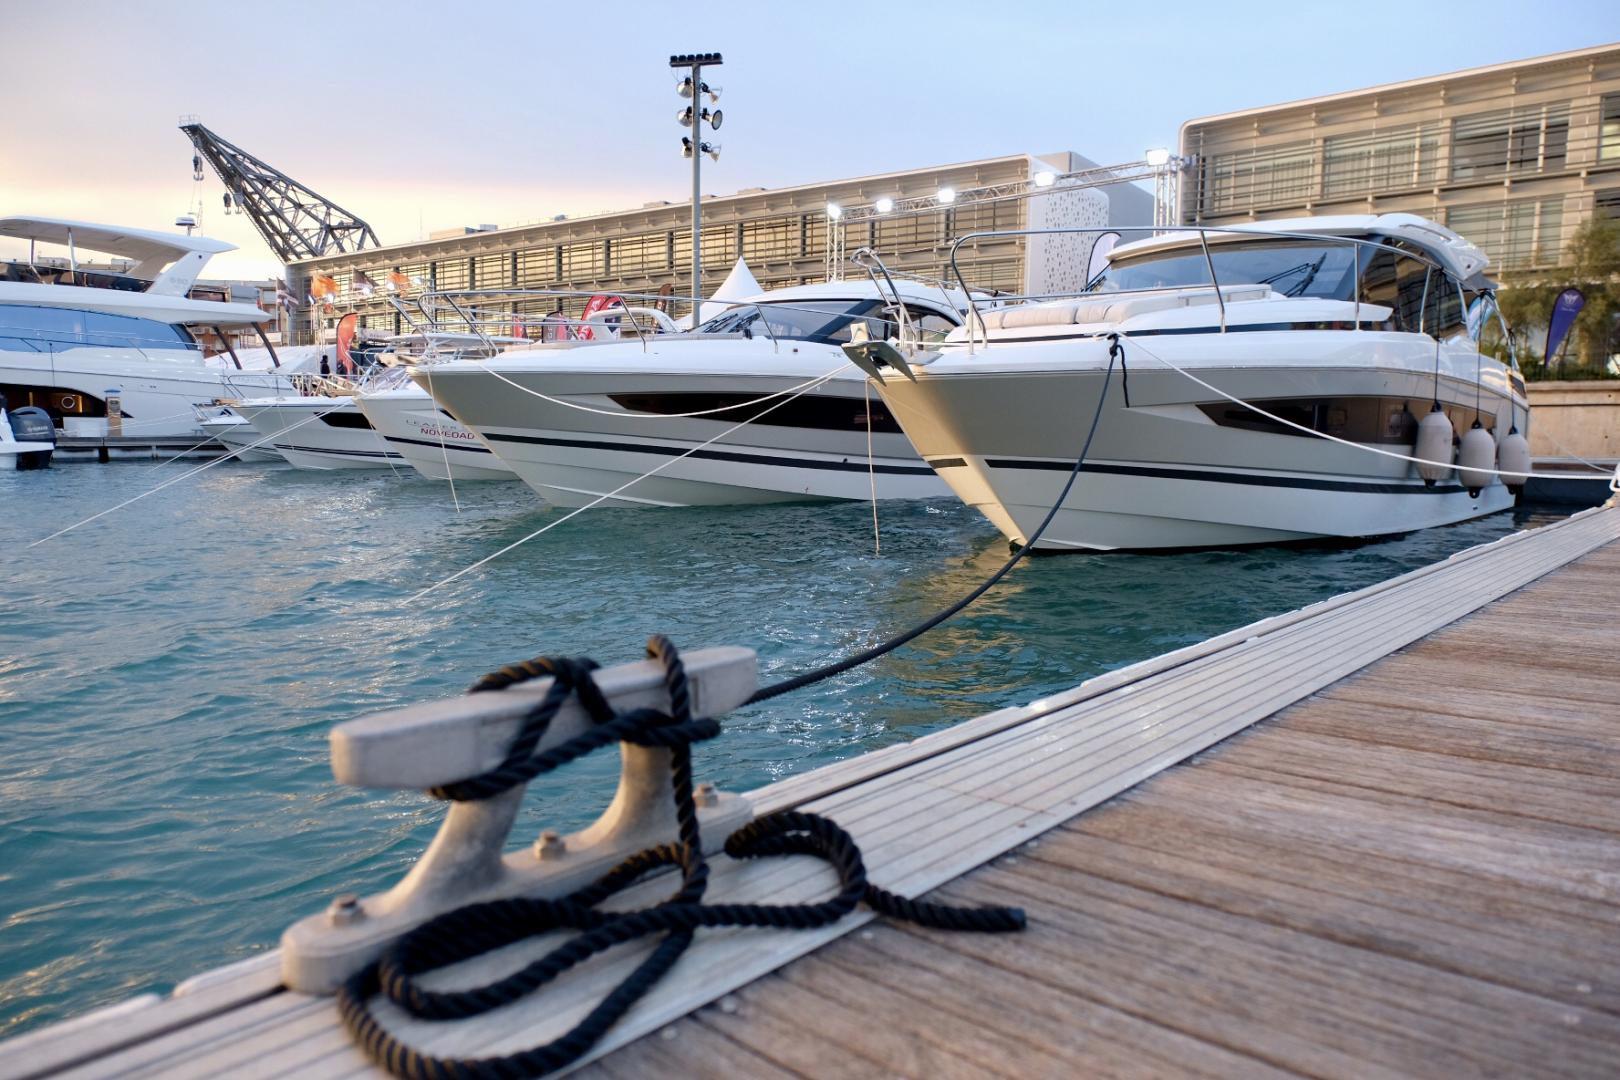 The Valencia Boat Show has already opened the registration period for exhibitors for the 2019 edition